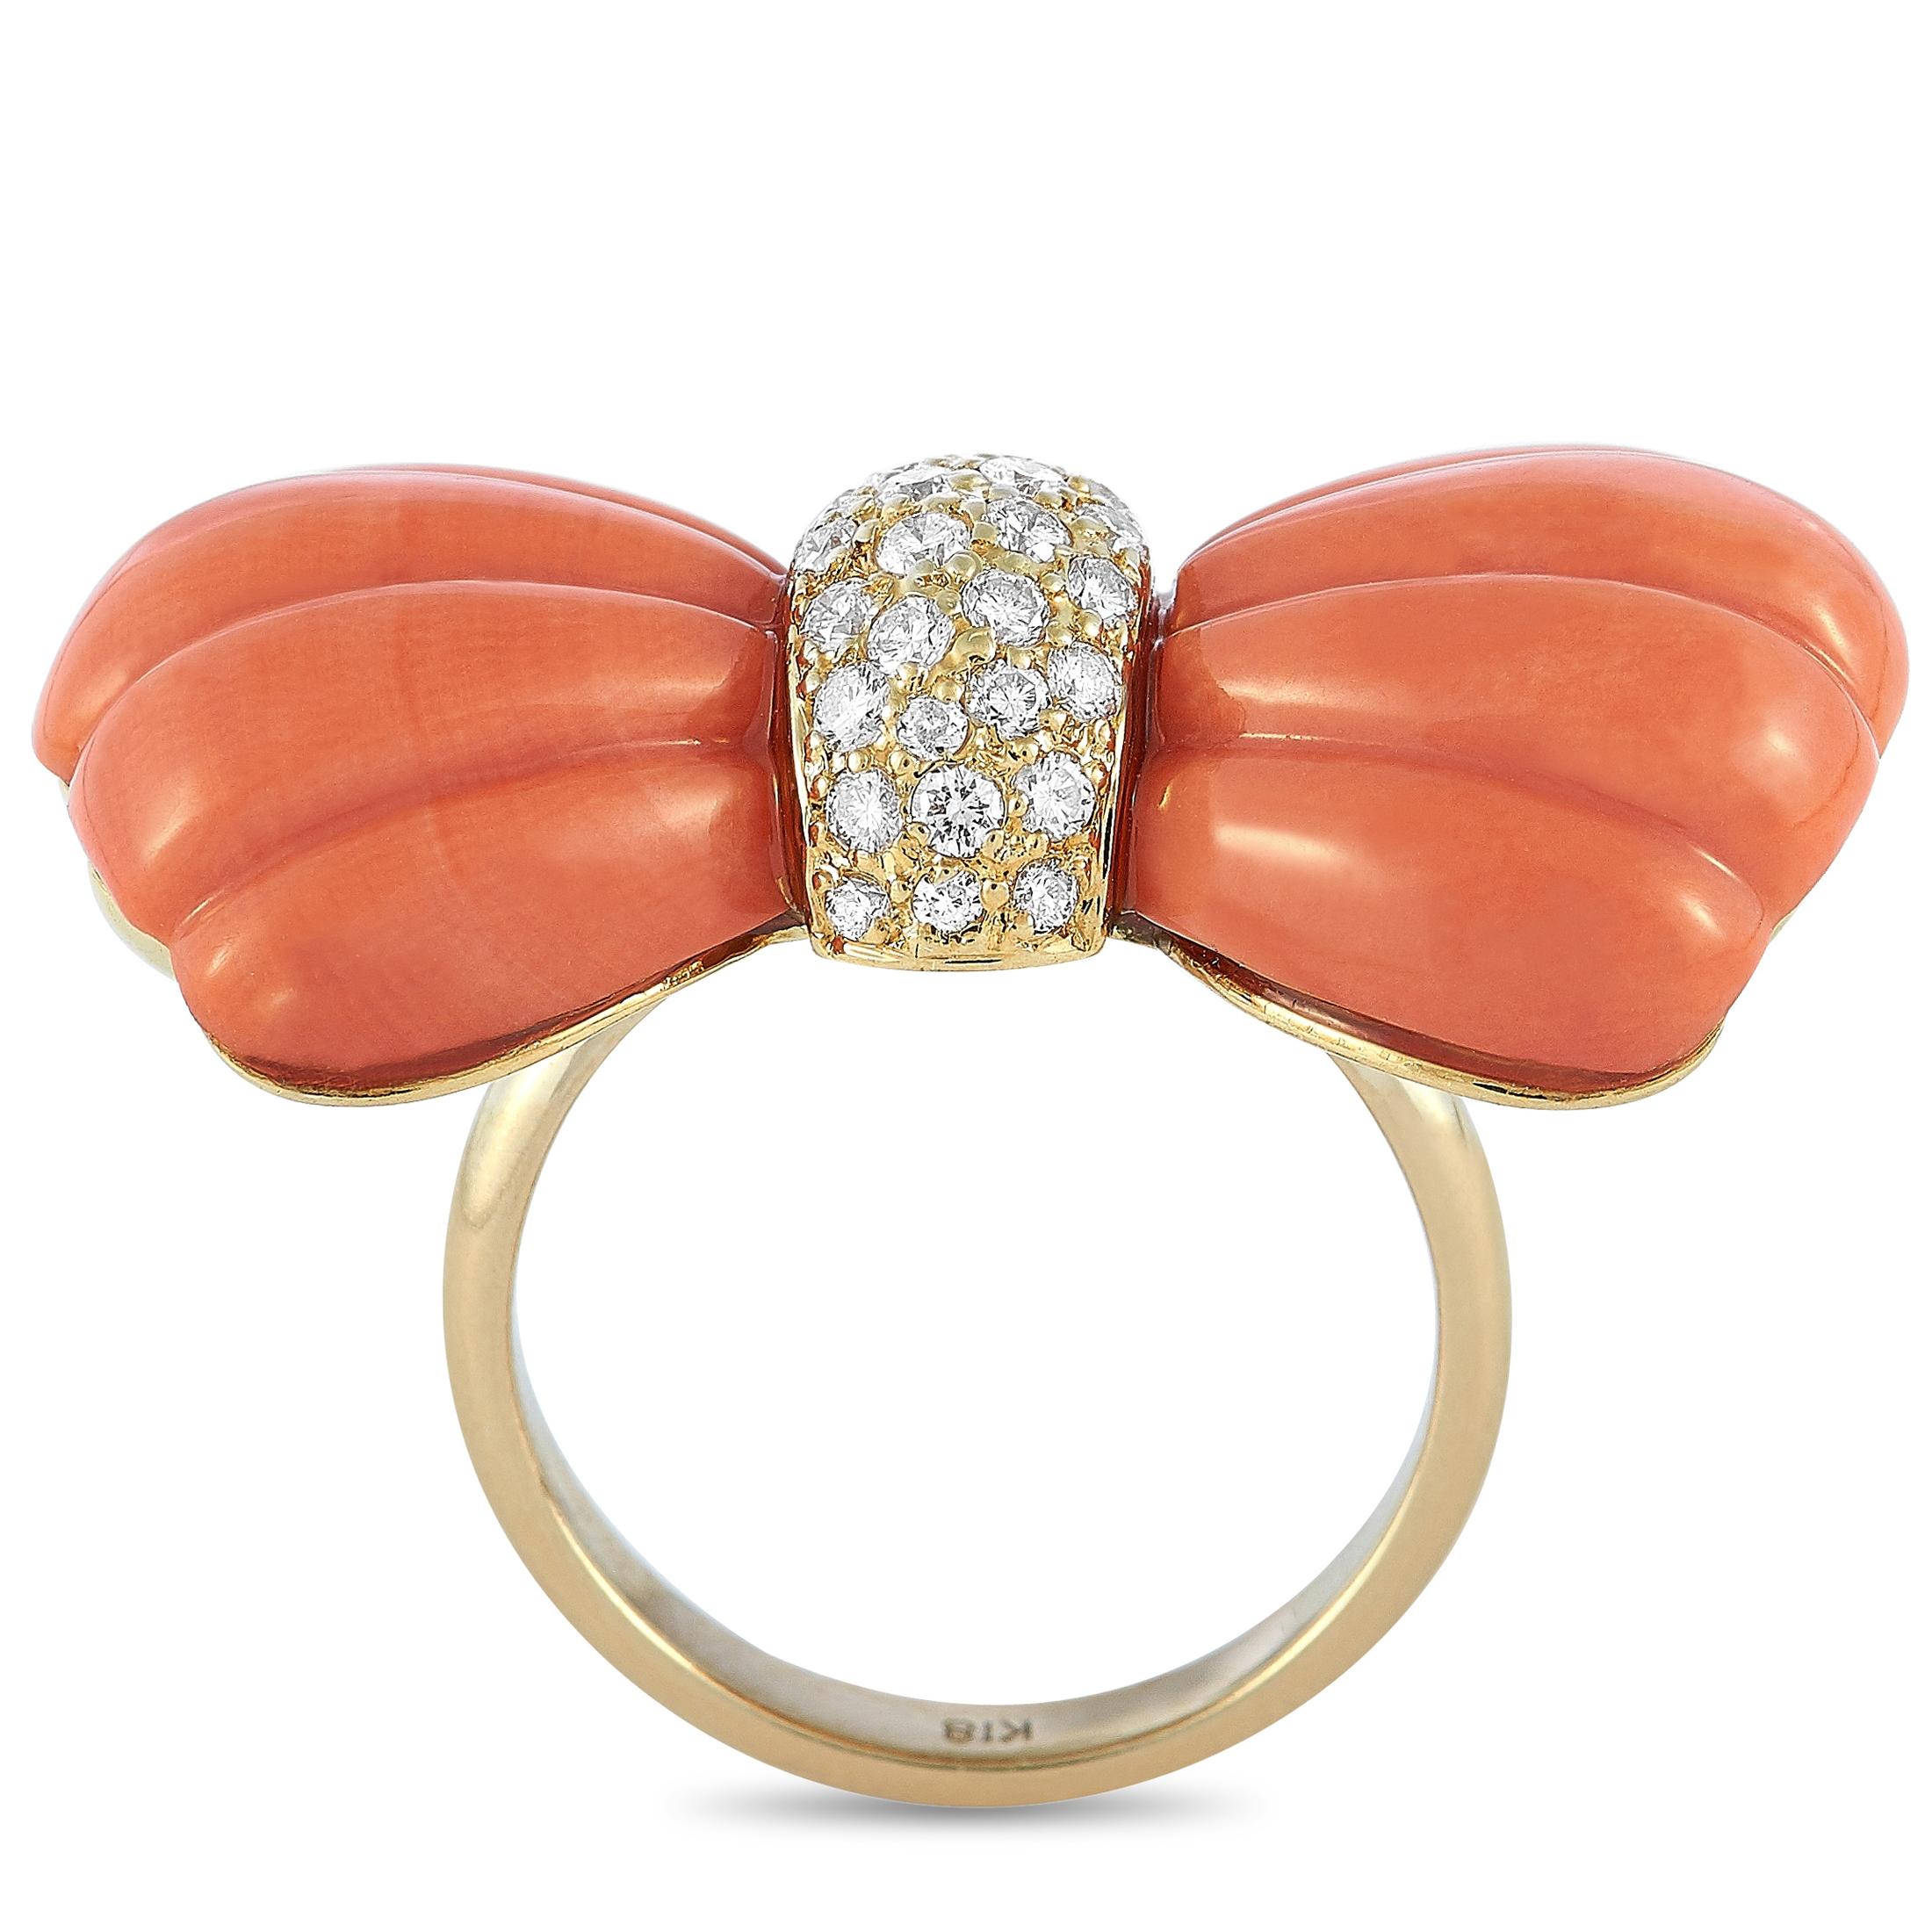 This LB Exclusive ring is made of 18K yellow gold and embellished with corals and a total of 0.65 carats of diamonds. The ring weighs 13.2 grams and boasts band thickness of 3 mm and top height of 7 mm, while top dimensions measure 33 by 18